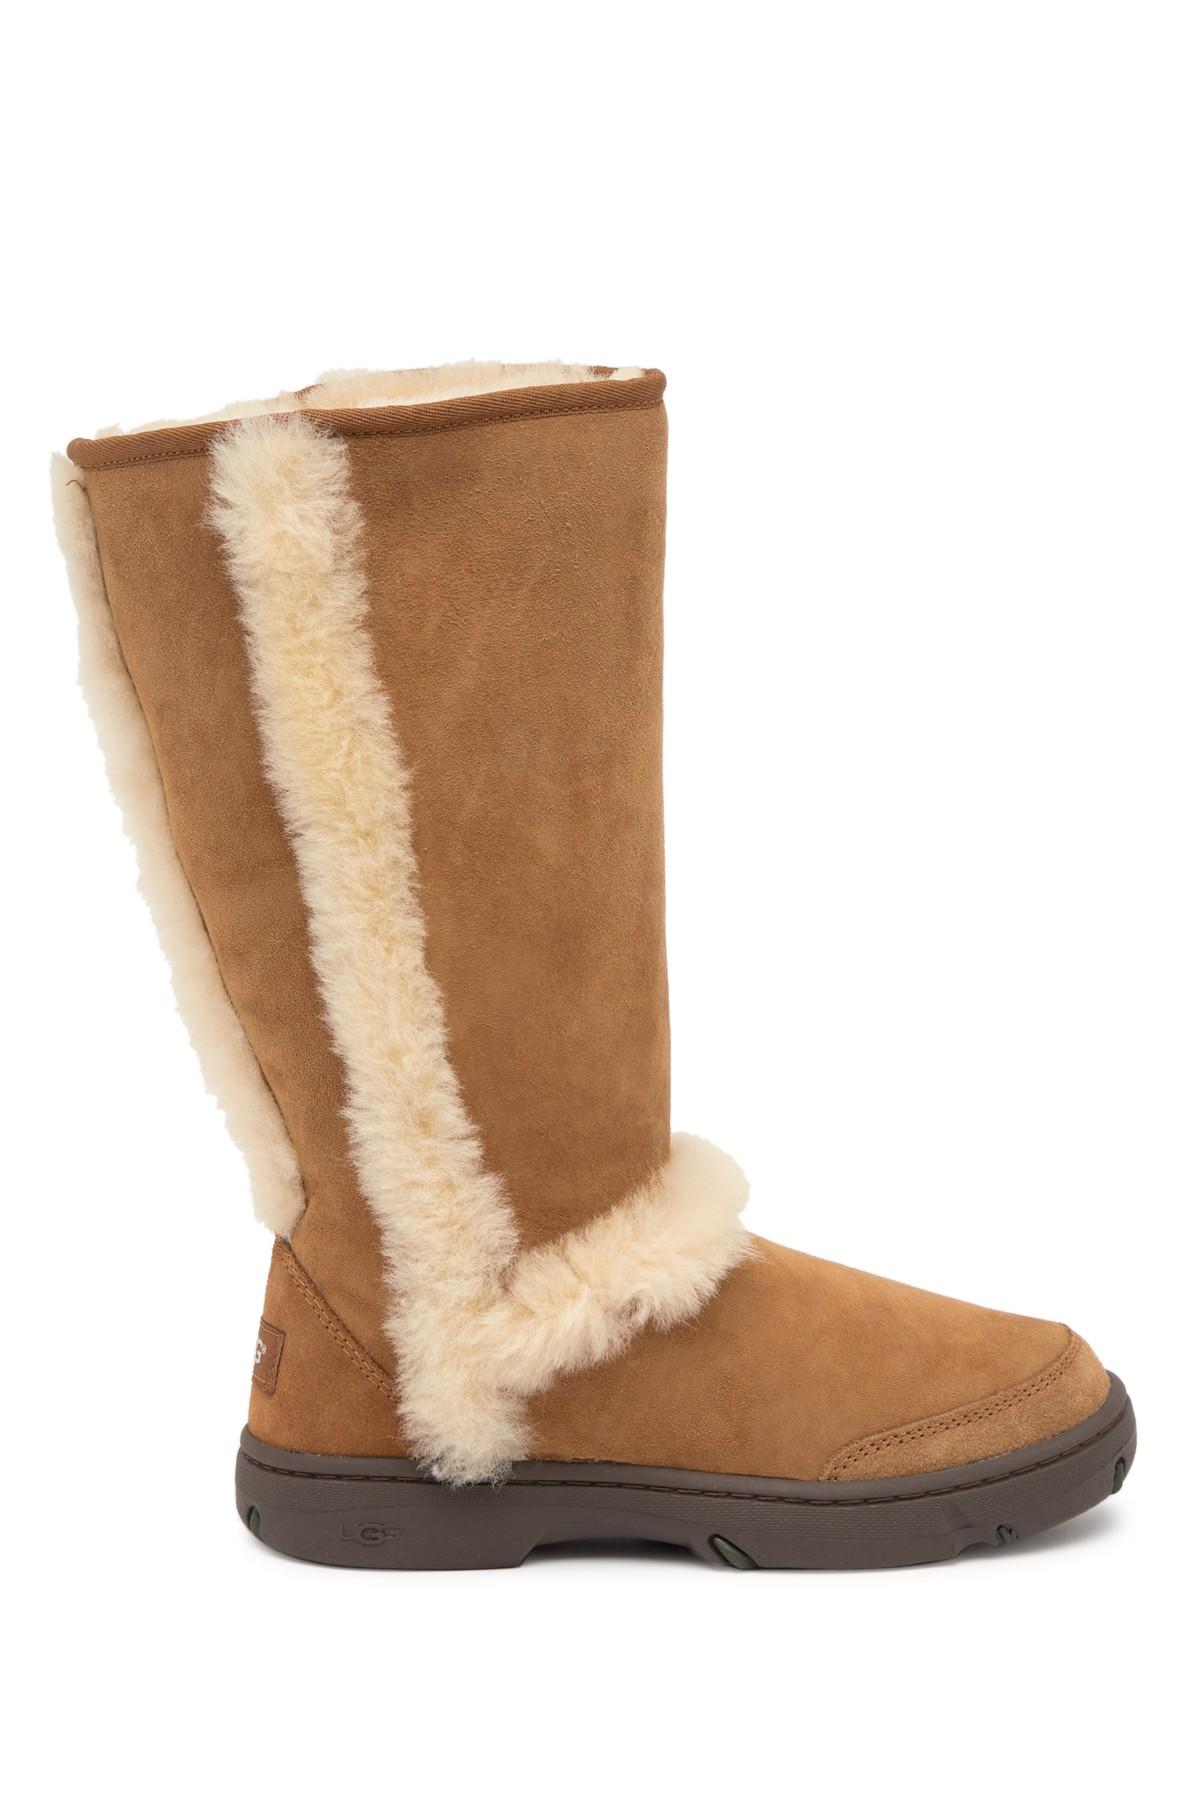 UGG Sunburst Genuine Shearling Tall Boot in Brown - Lyst